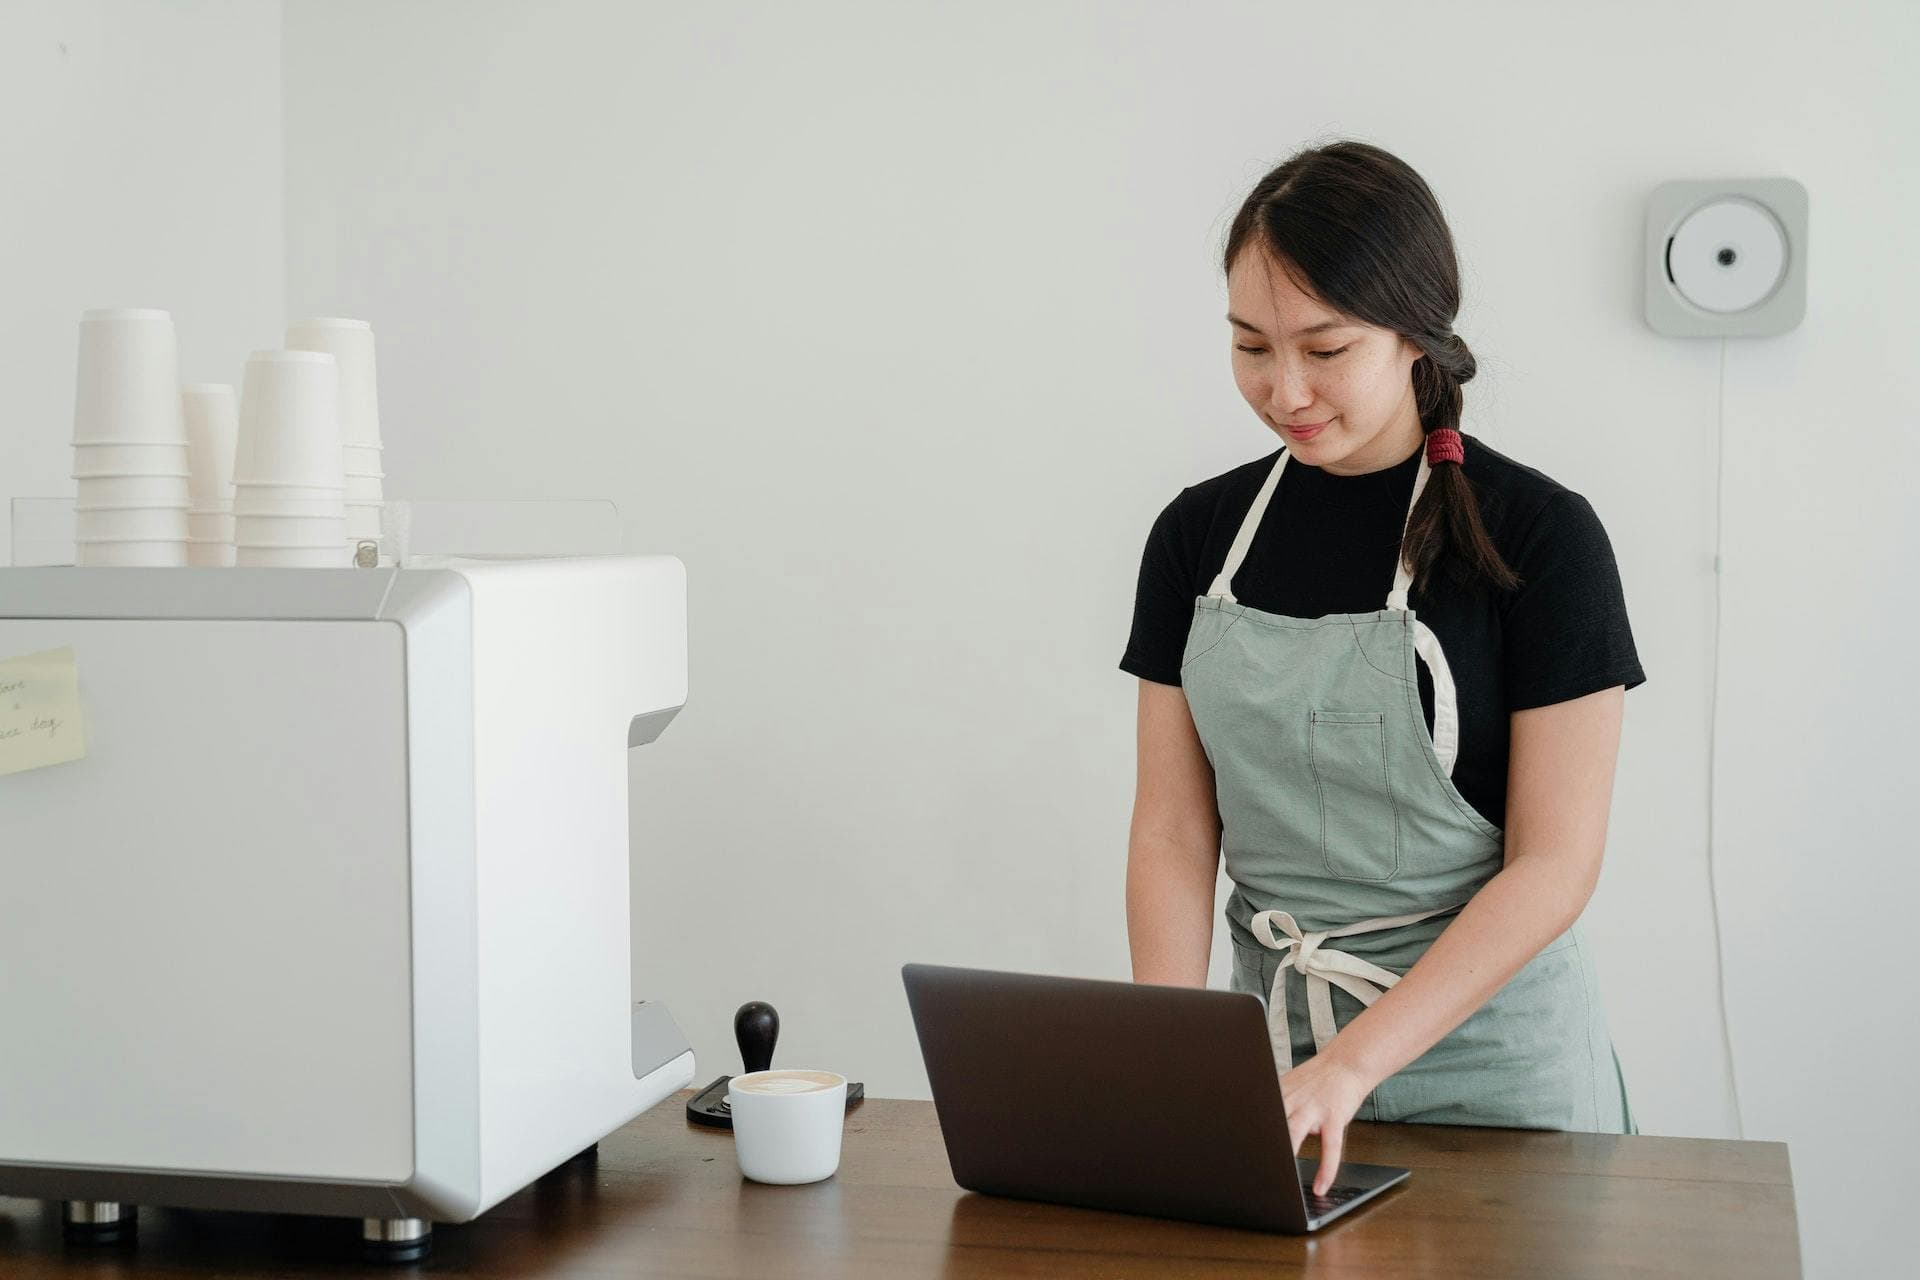 Café shop owner in apron on laptop next to coffee machine